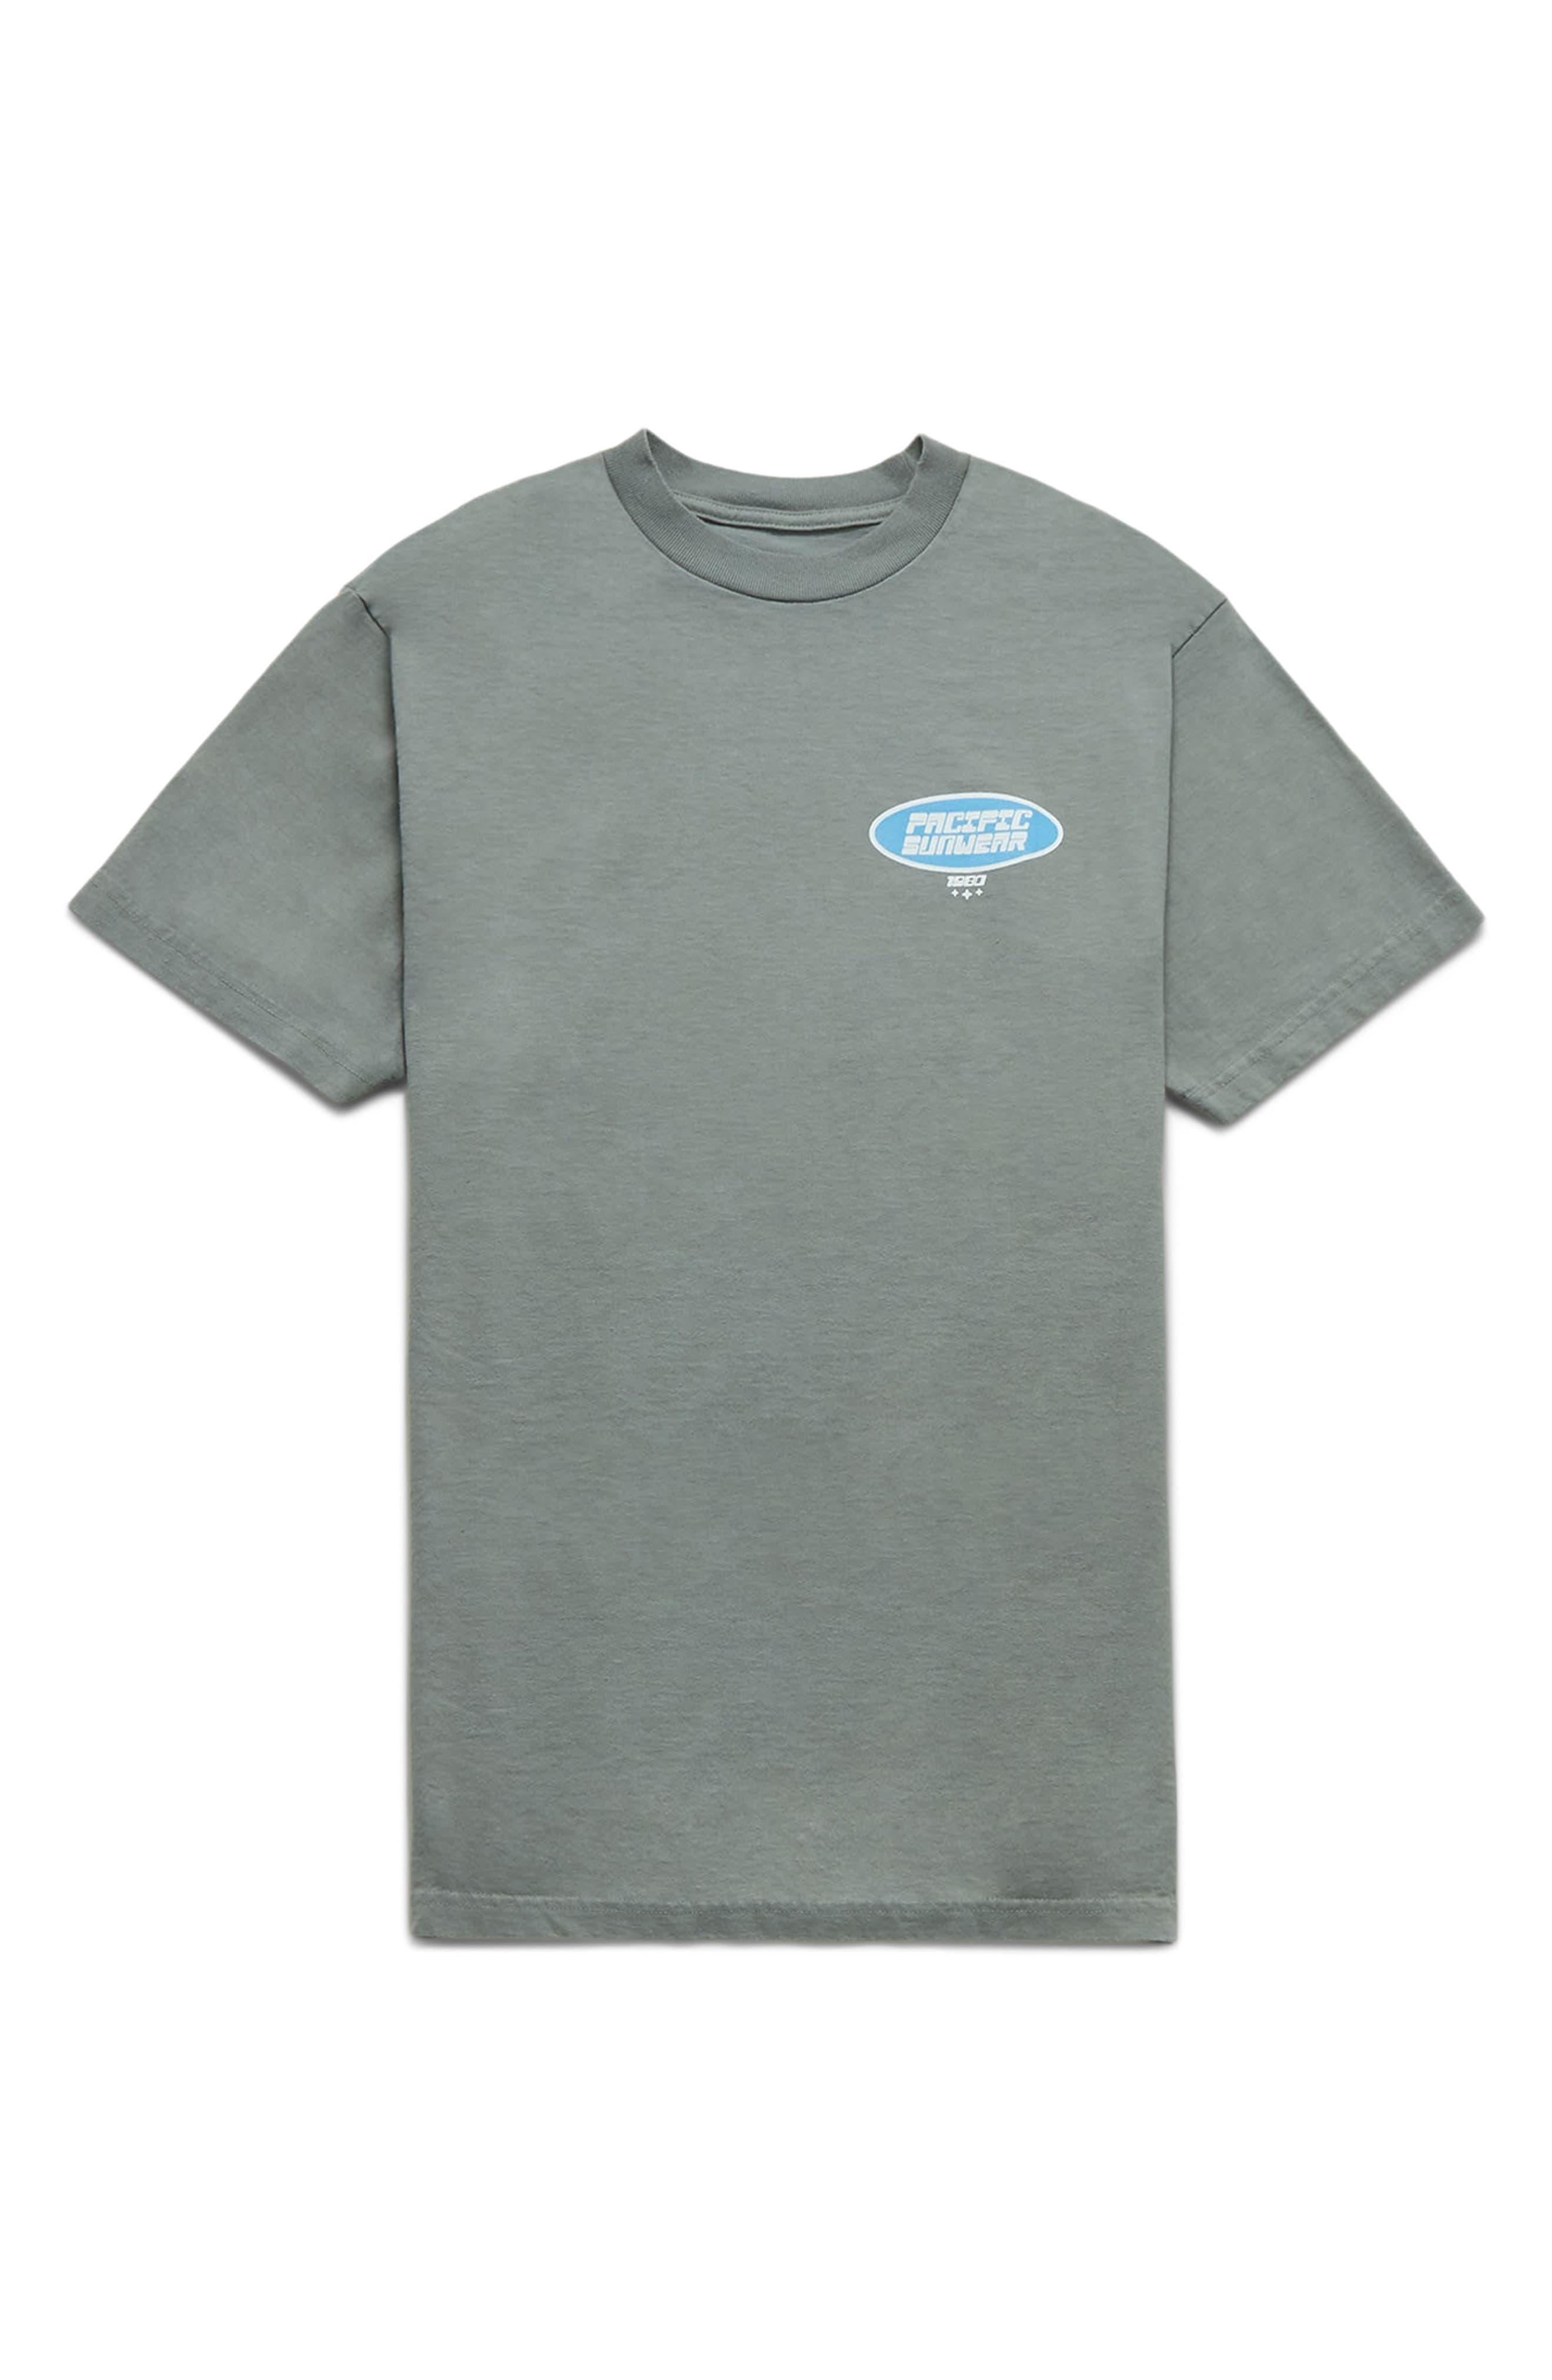 PacSun Badge Graphic T-shirt in Gray for Men